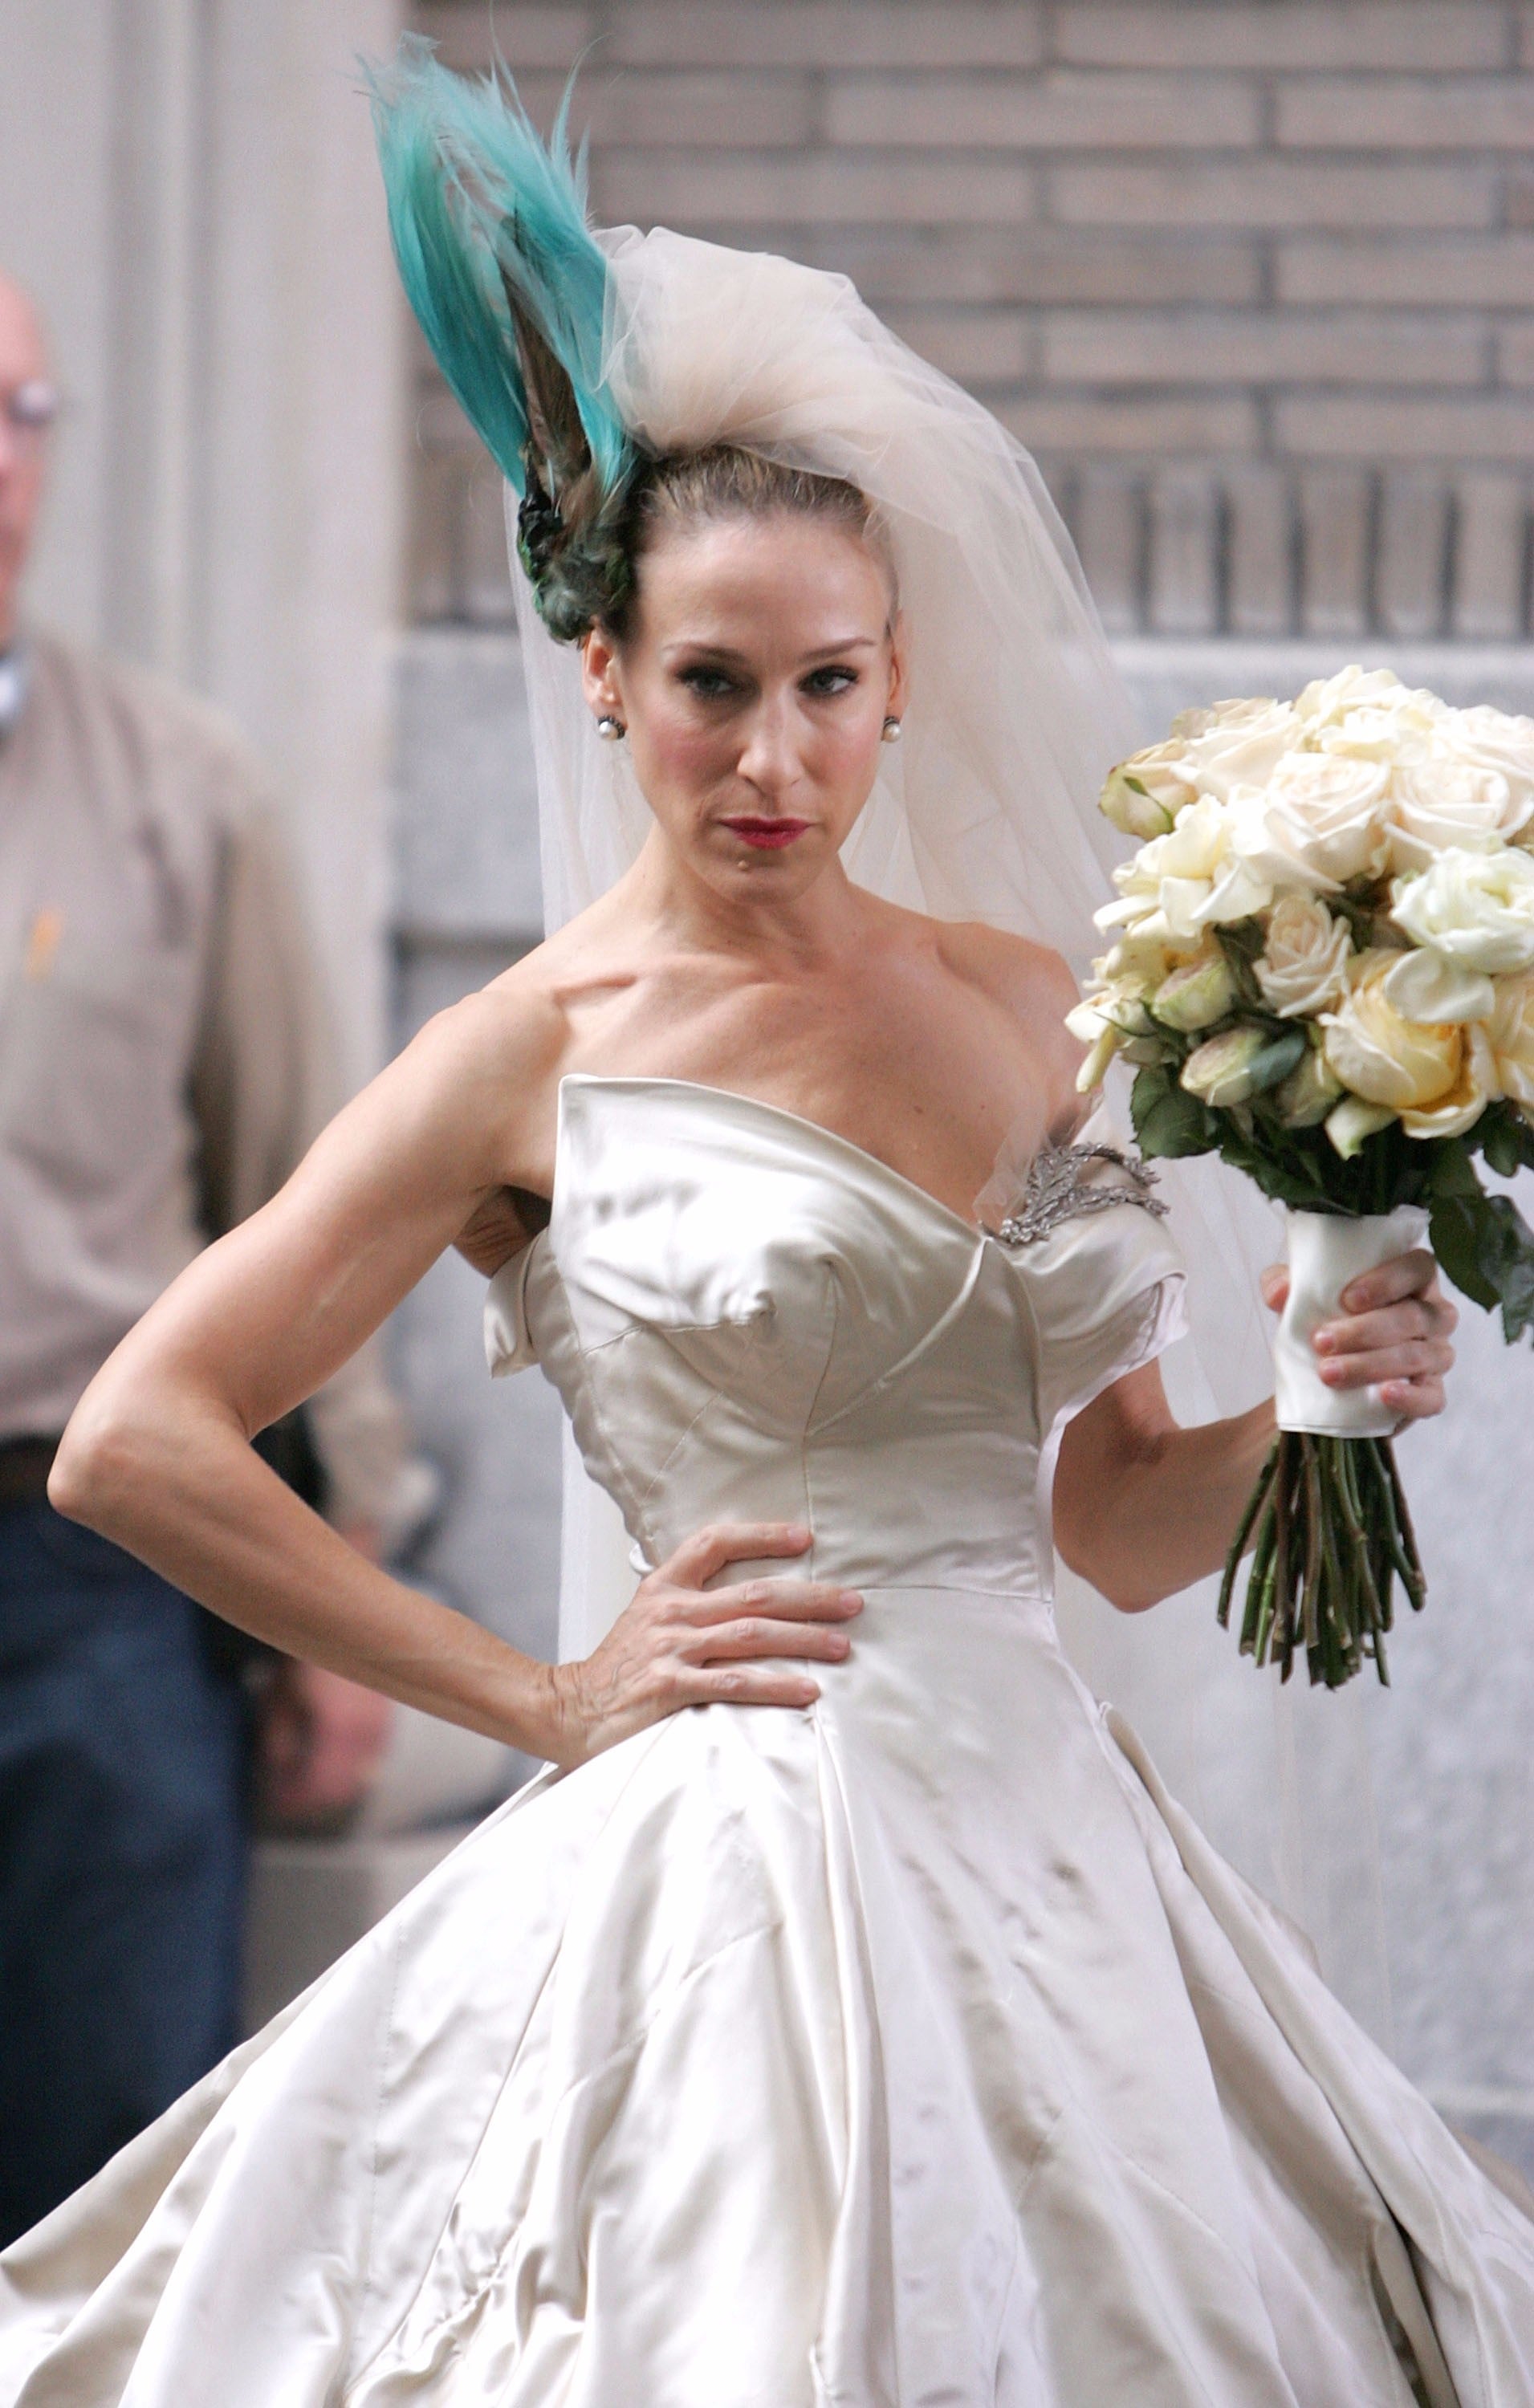 Carrie Bradshaw's Wedding Shoes